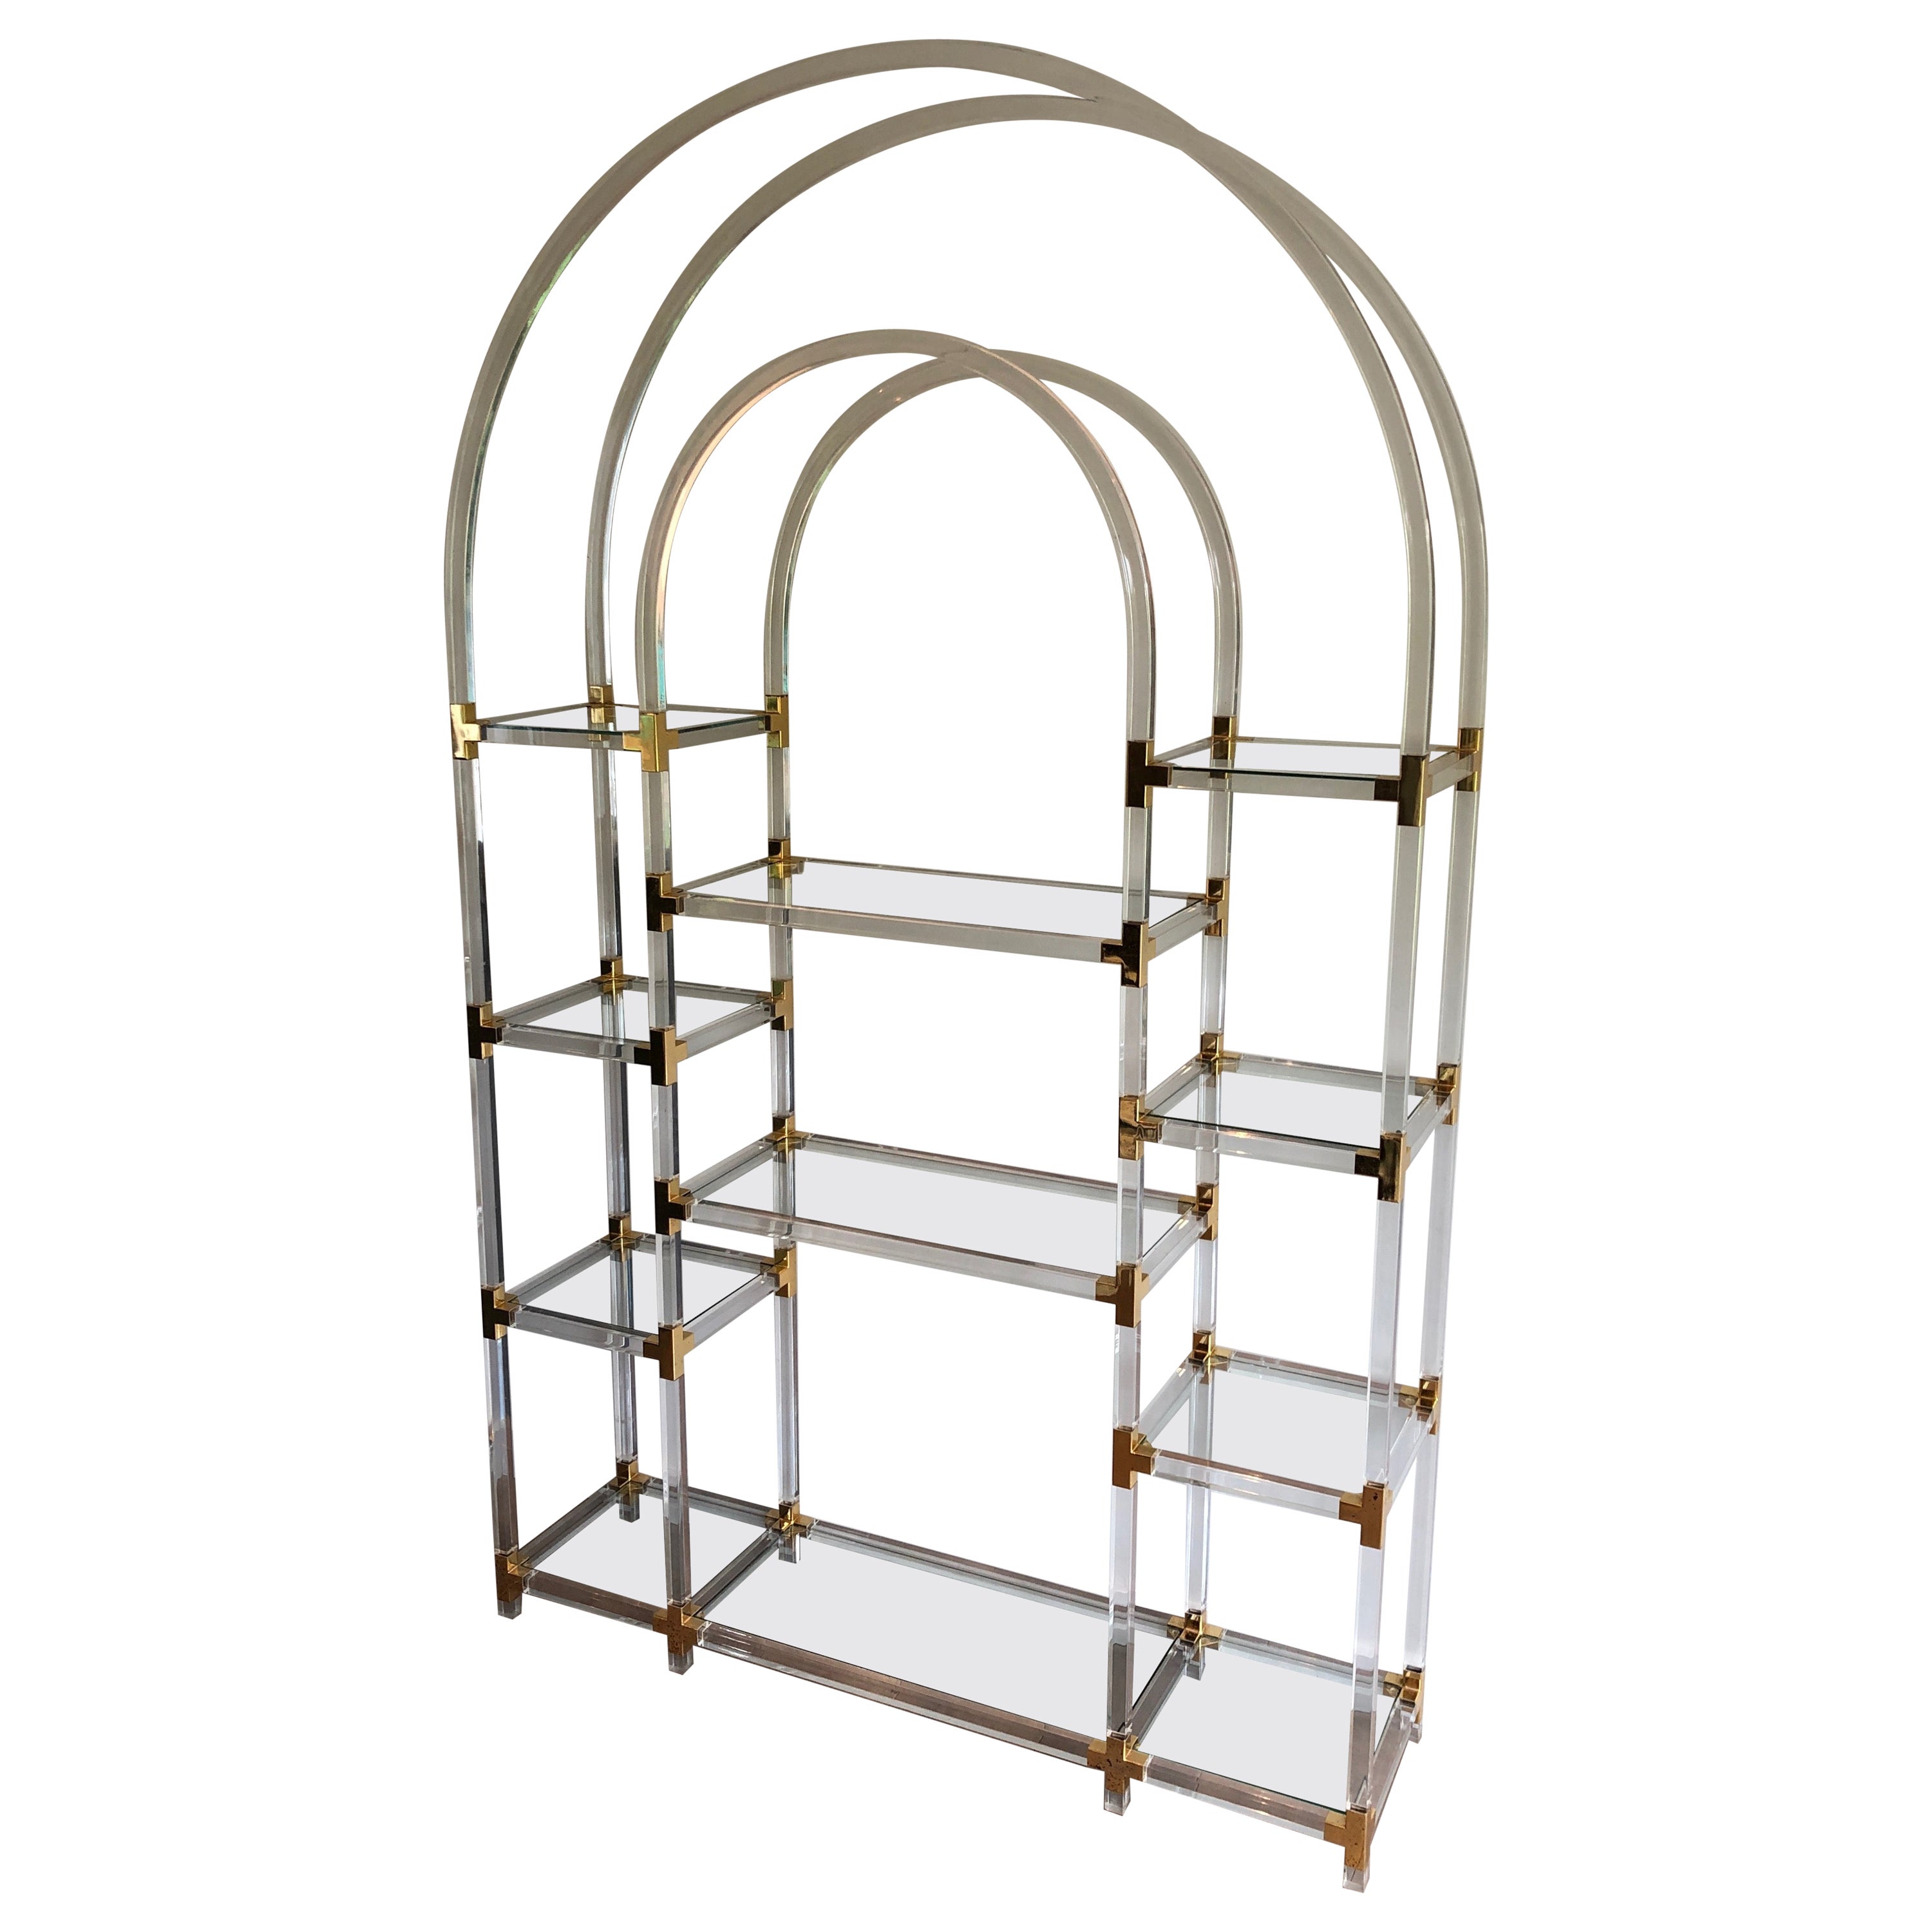 Lucite, Gilded Metal and Glass Shelve, American Work by Charles Hollis Jones